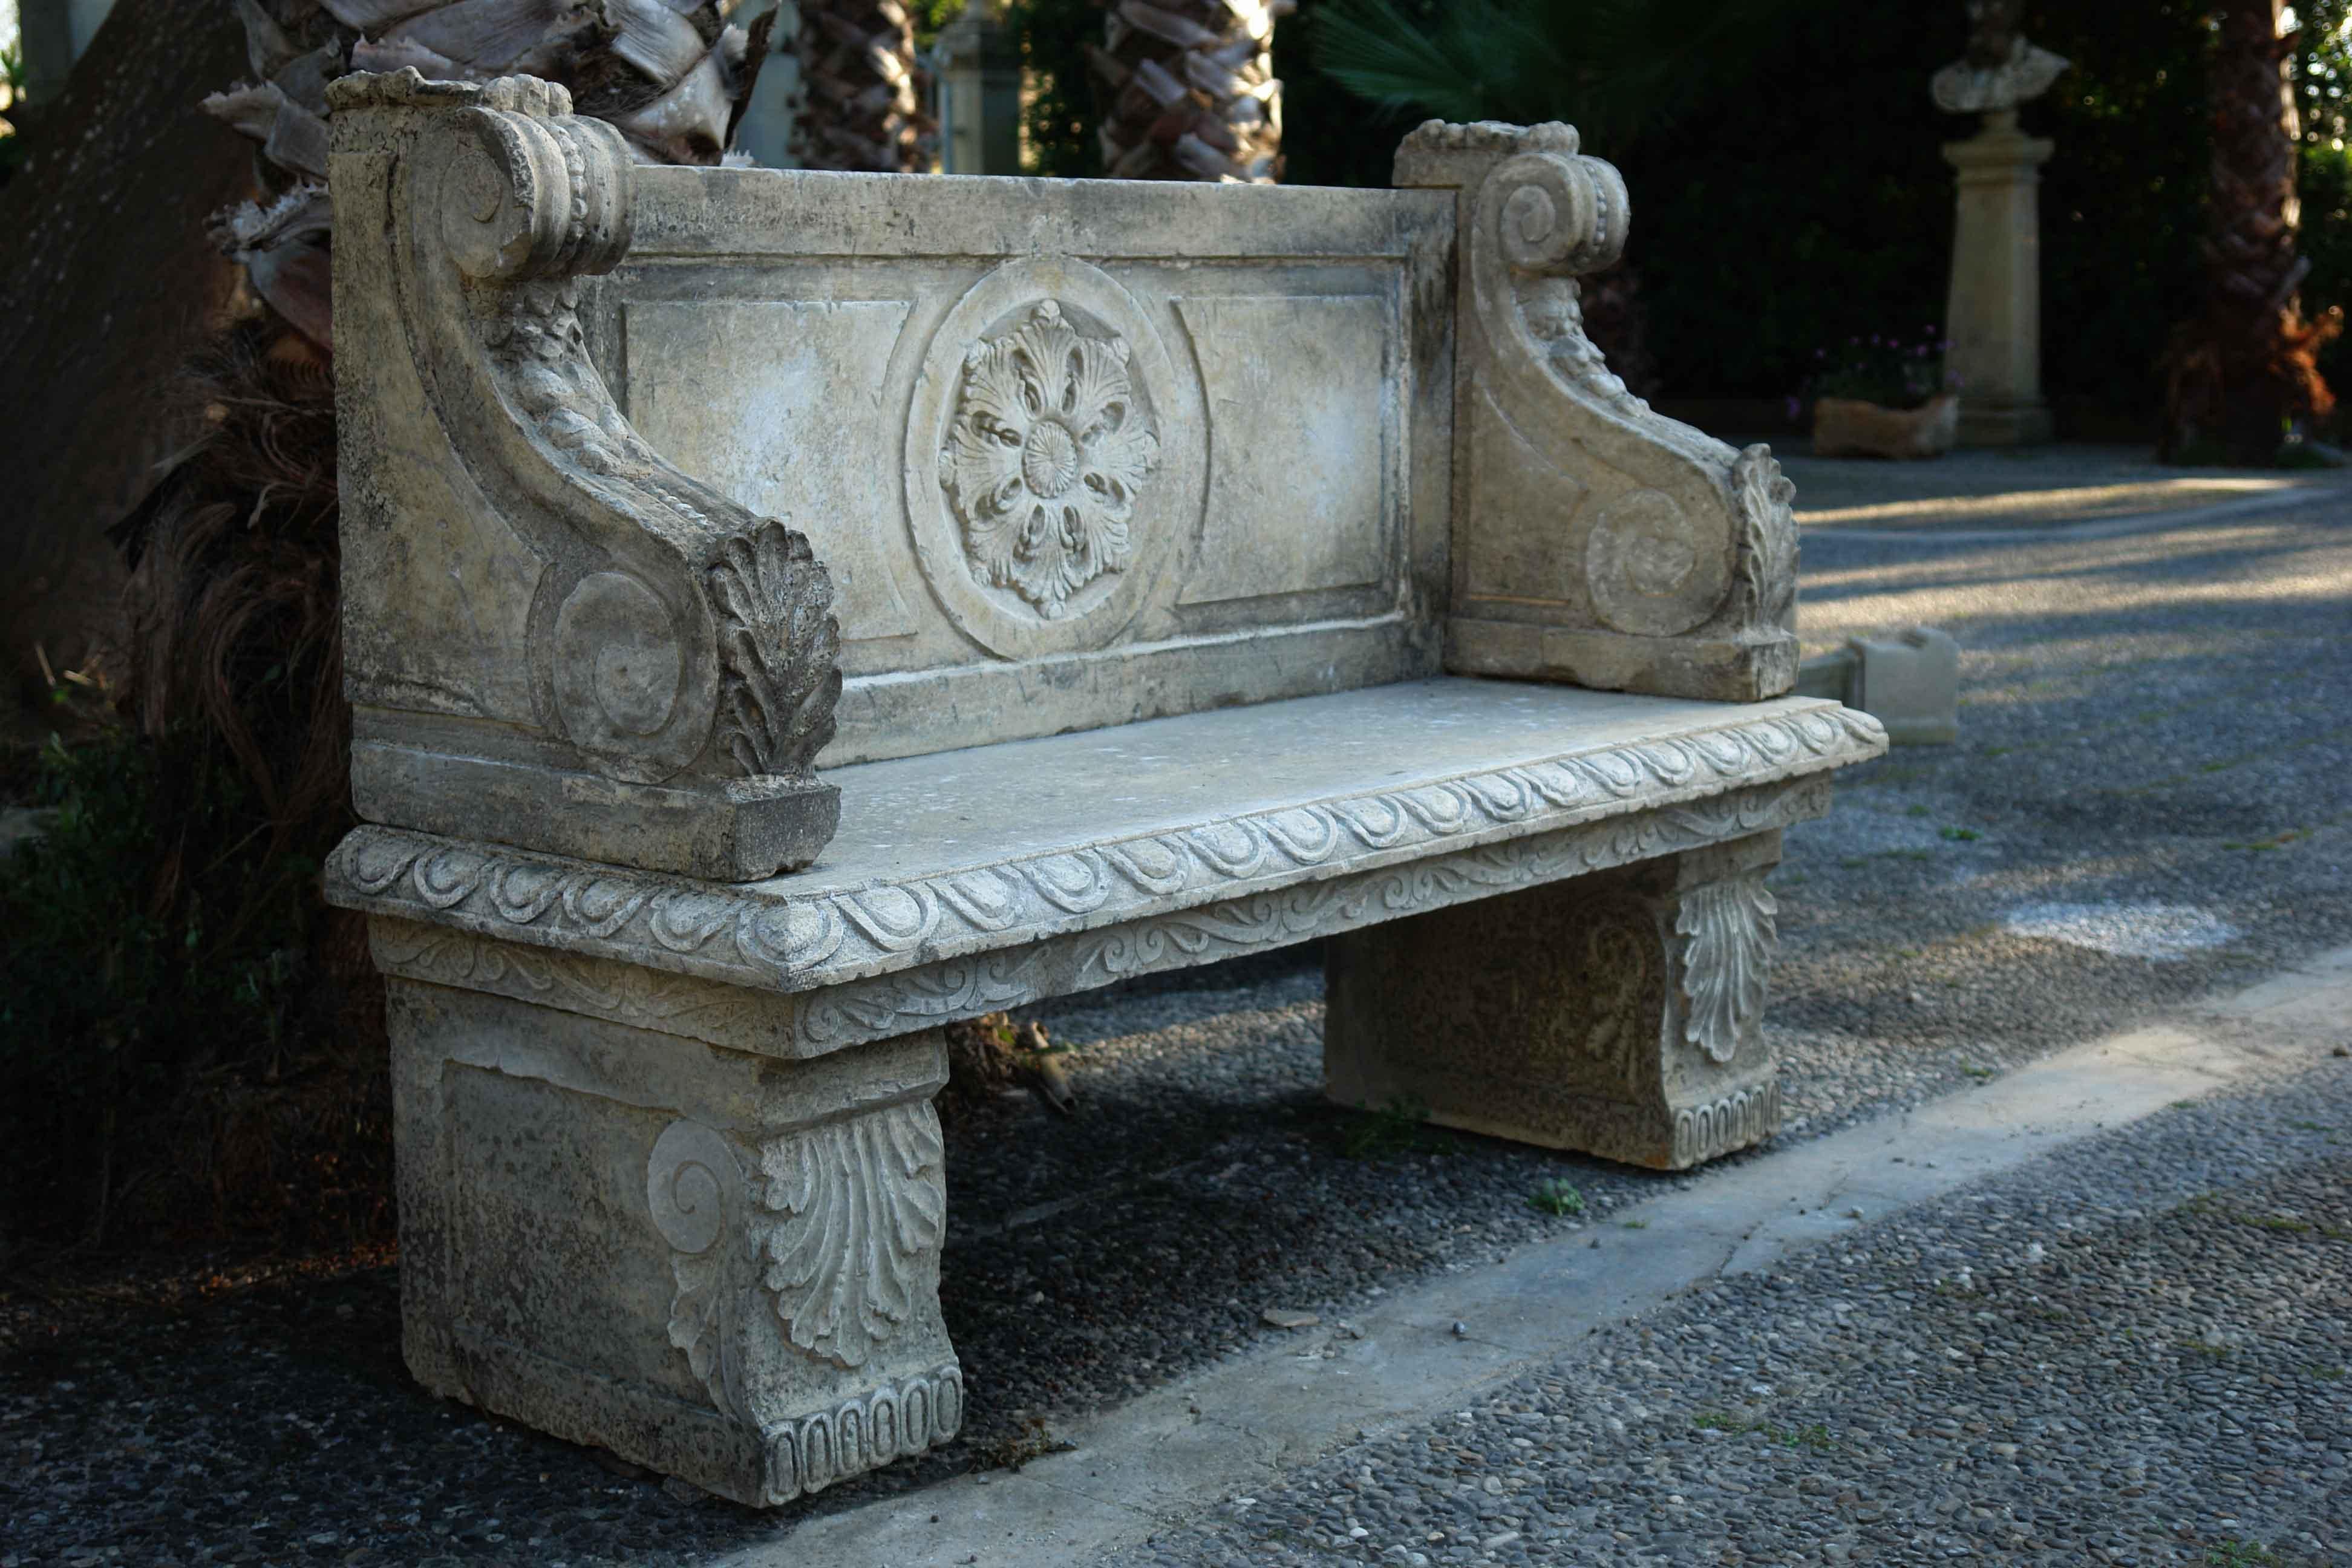 Italian Renaissance style bench hand-carved in limestone.
Excellent quality of art work in pure limestone, handcrafted, acanthus leaves, fluting, and Renaissance style ornaments.
More info on demand.
